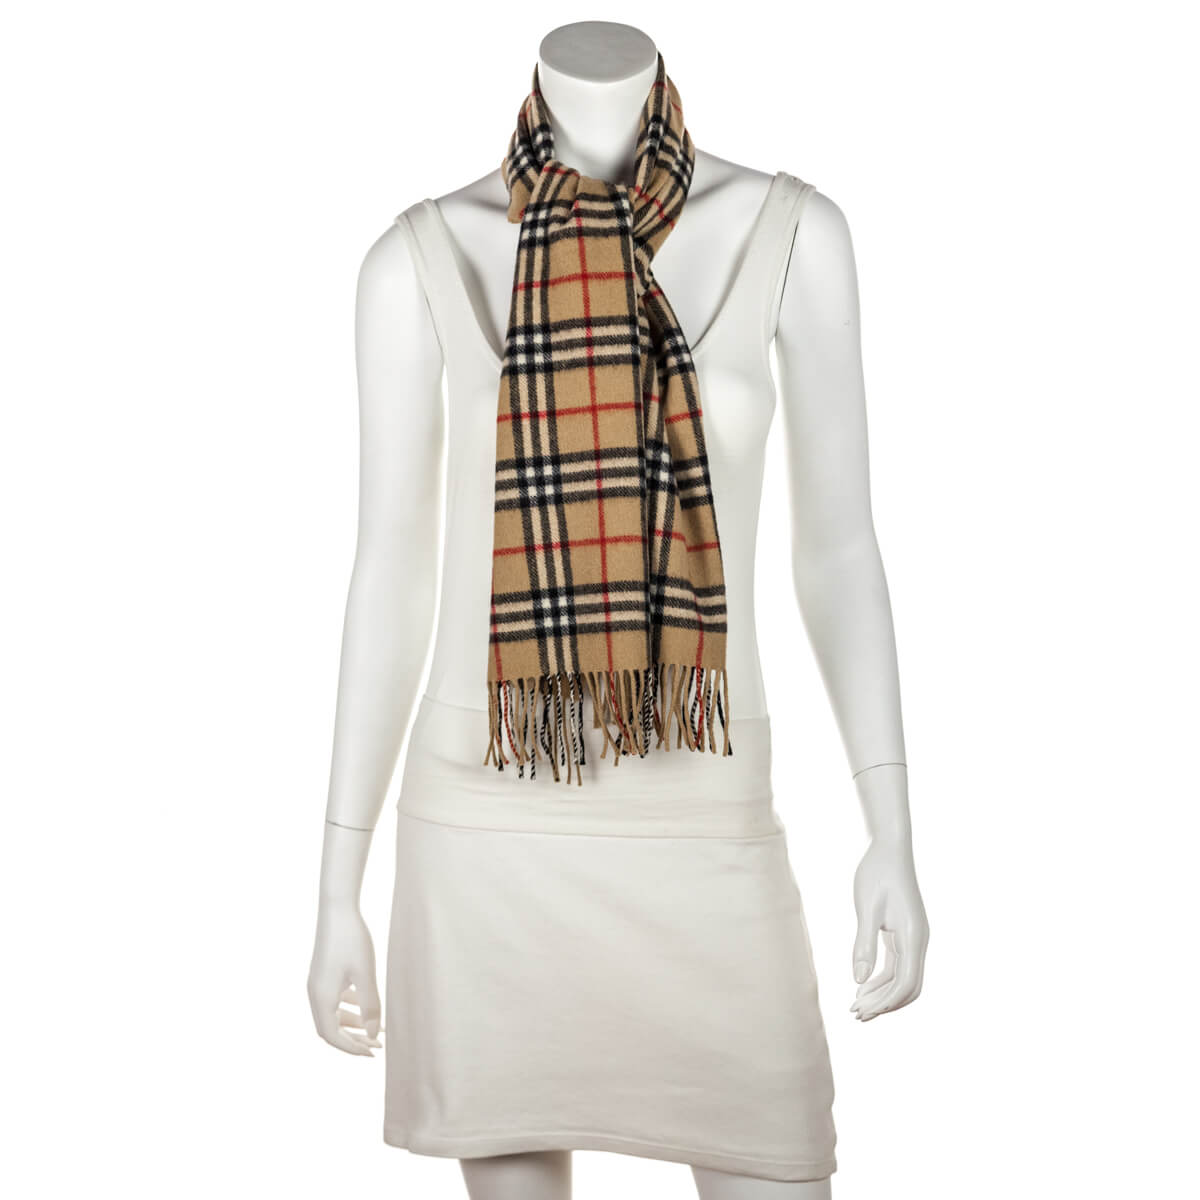 Burberry Tan Wool House Check Vintage Scarf - Love that Bag etc - Preowned Authentic Designer Handbags & Preloved Fashions